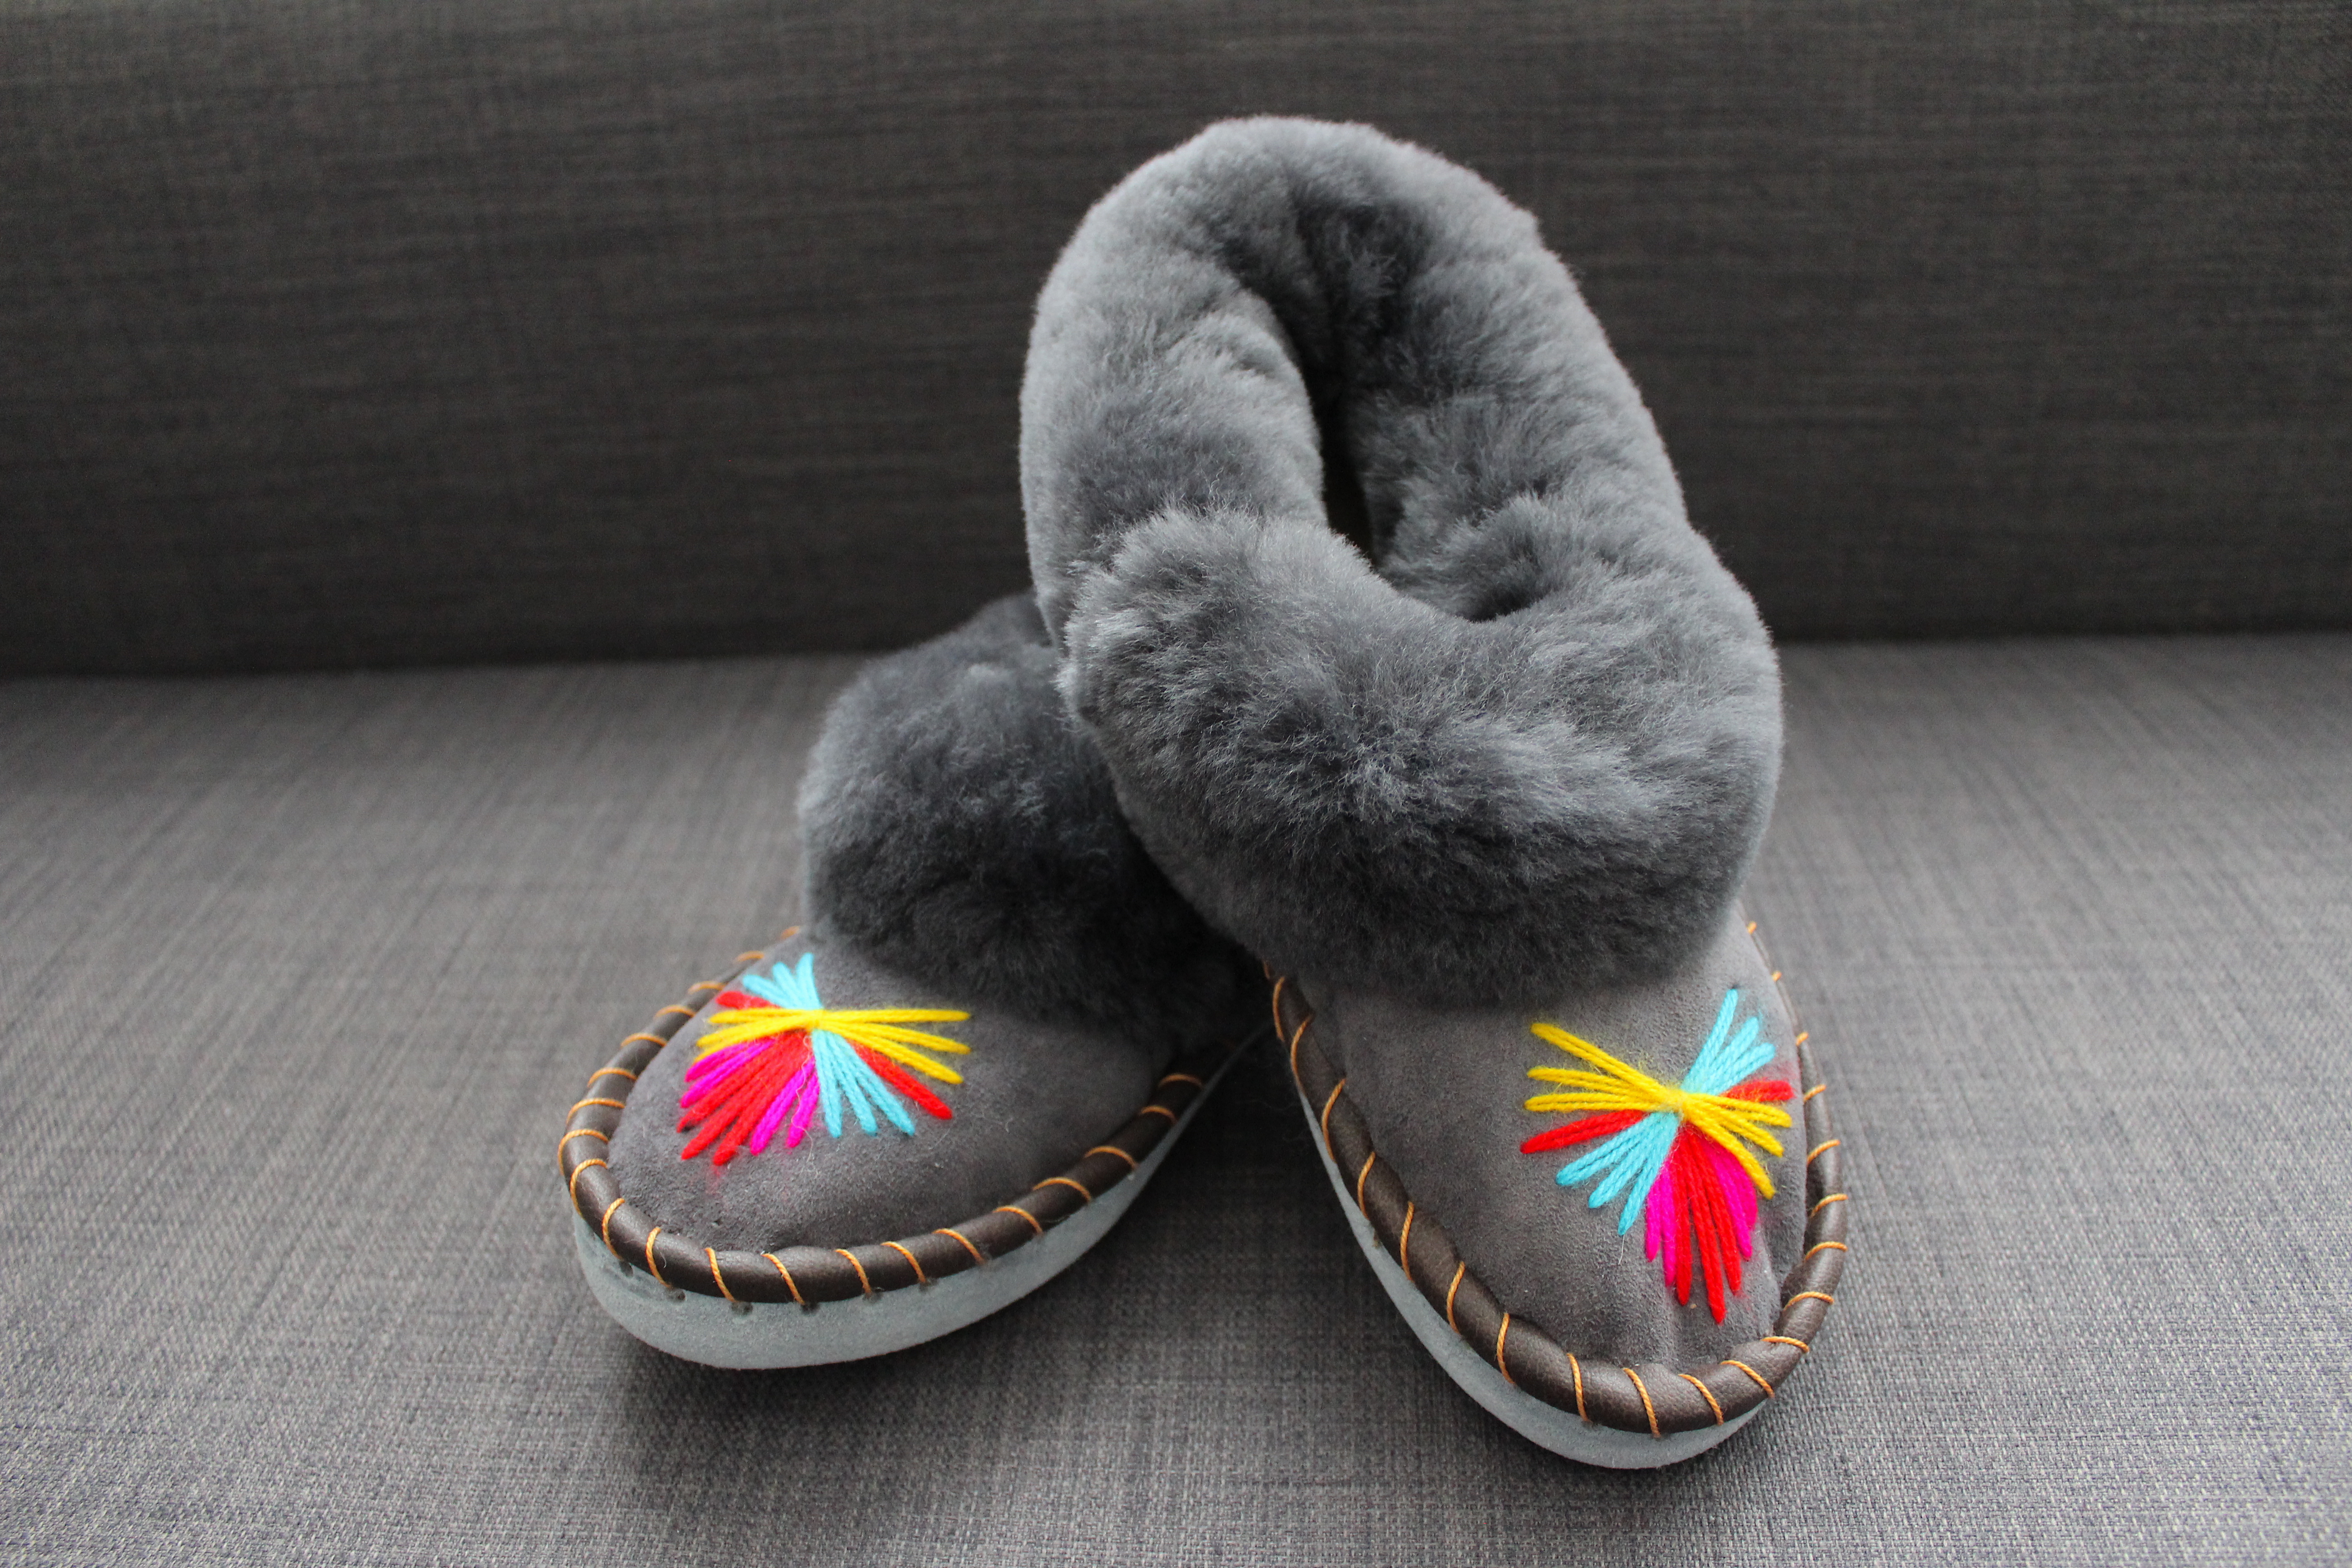 embroidered slippers